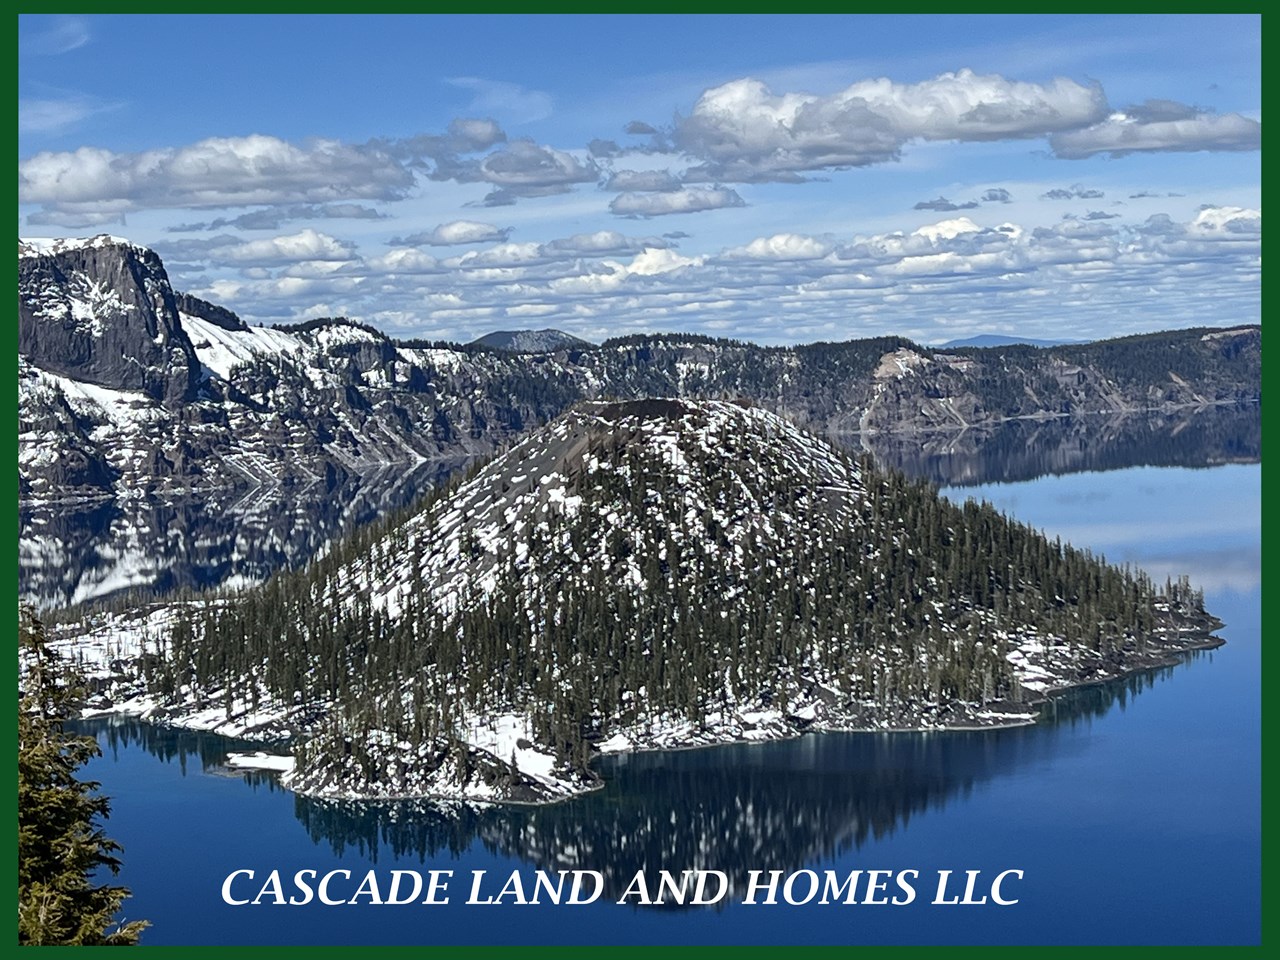 crater lake national park is only about 30 miles away!